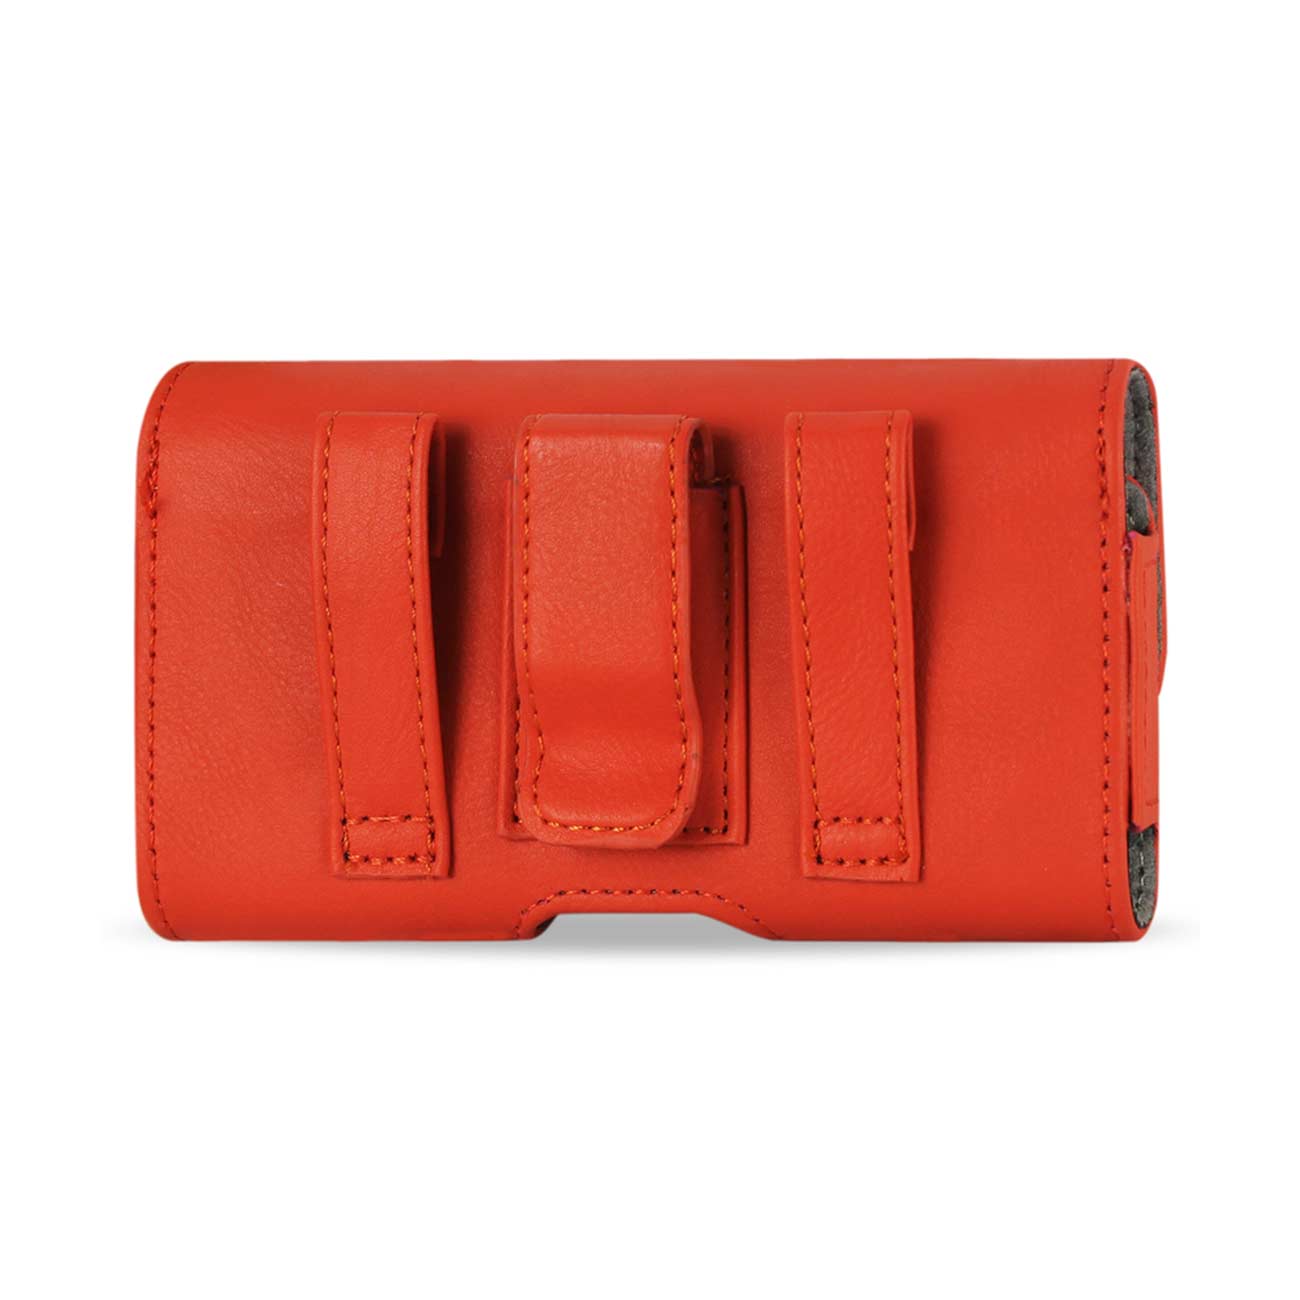 Pouch/Phone Holster Leather Horizontal With Easy Take Out Orange Color